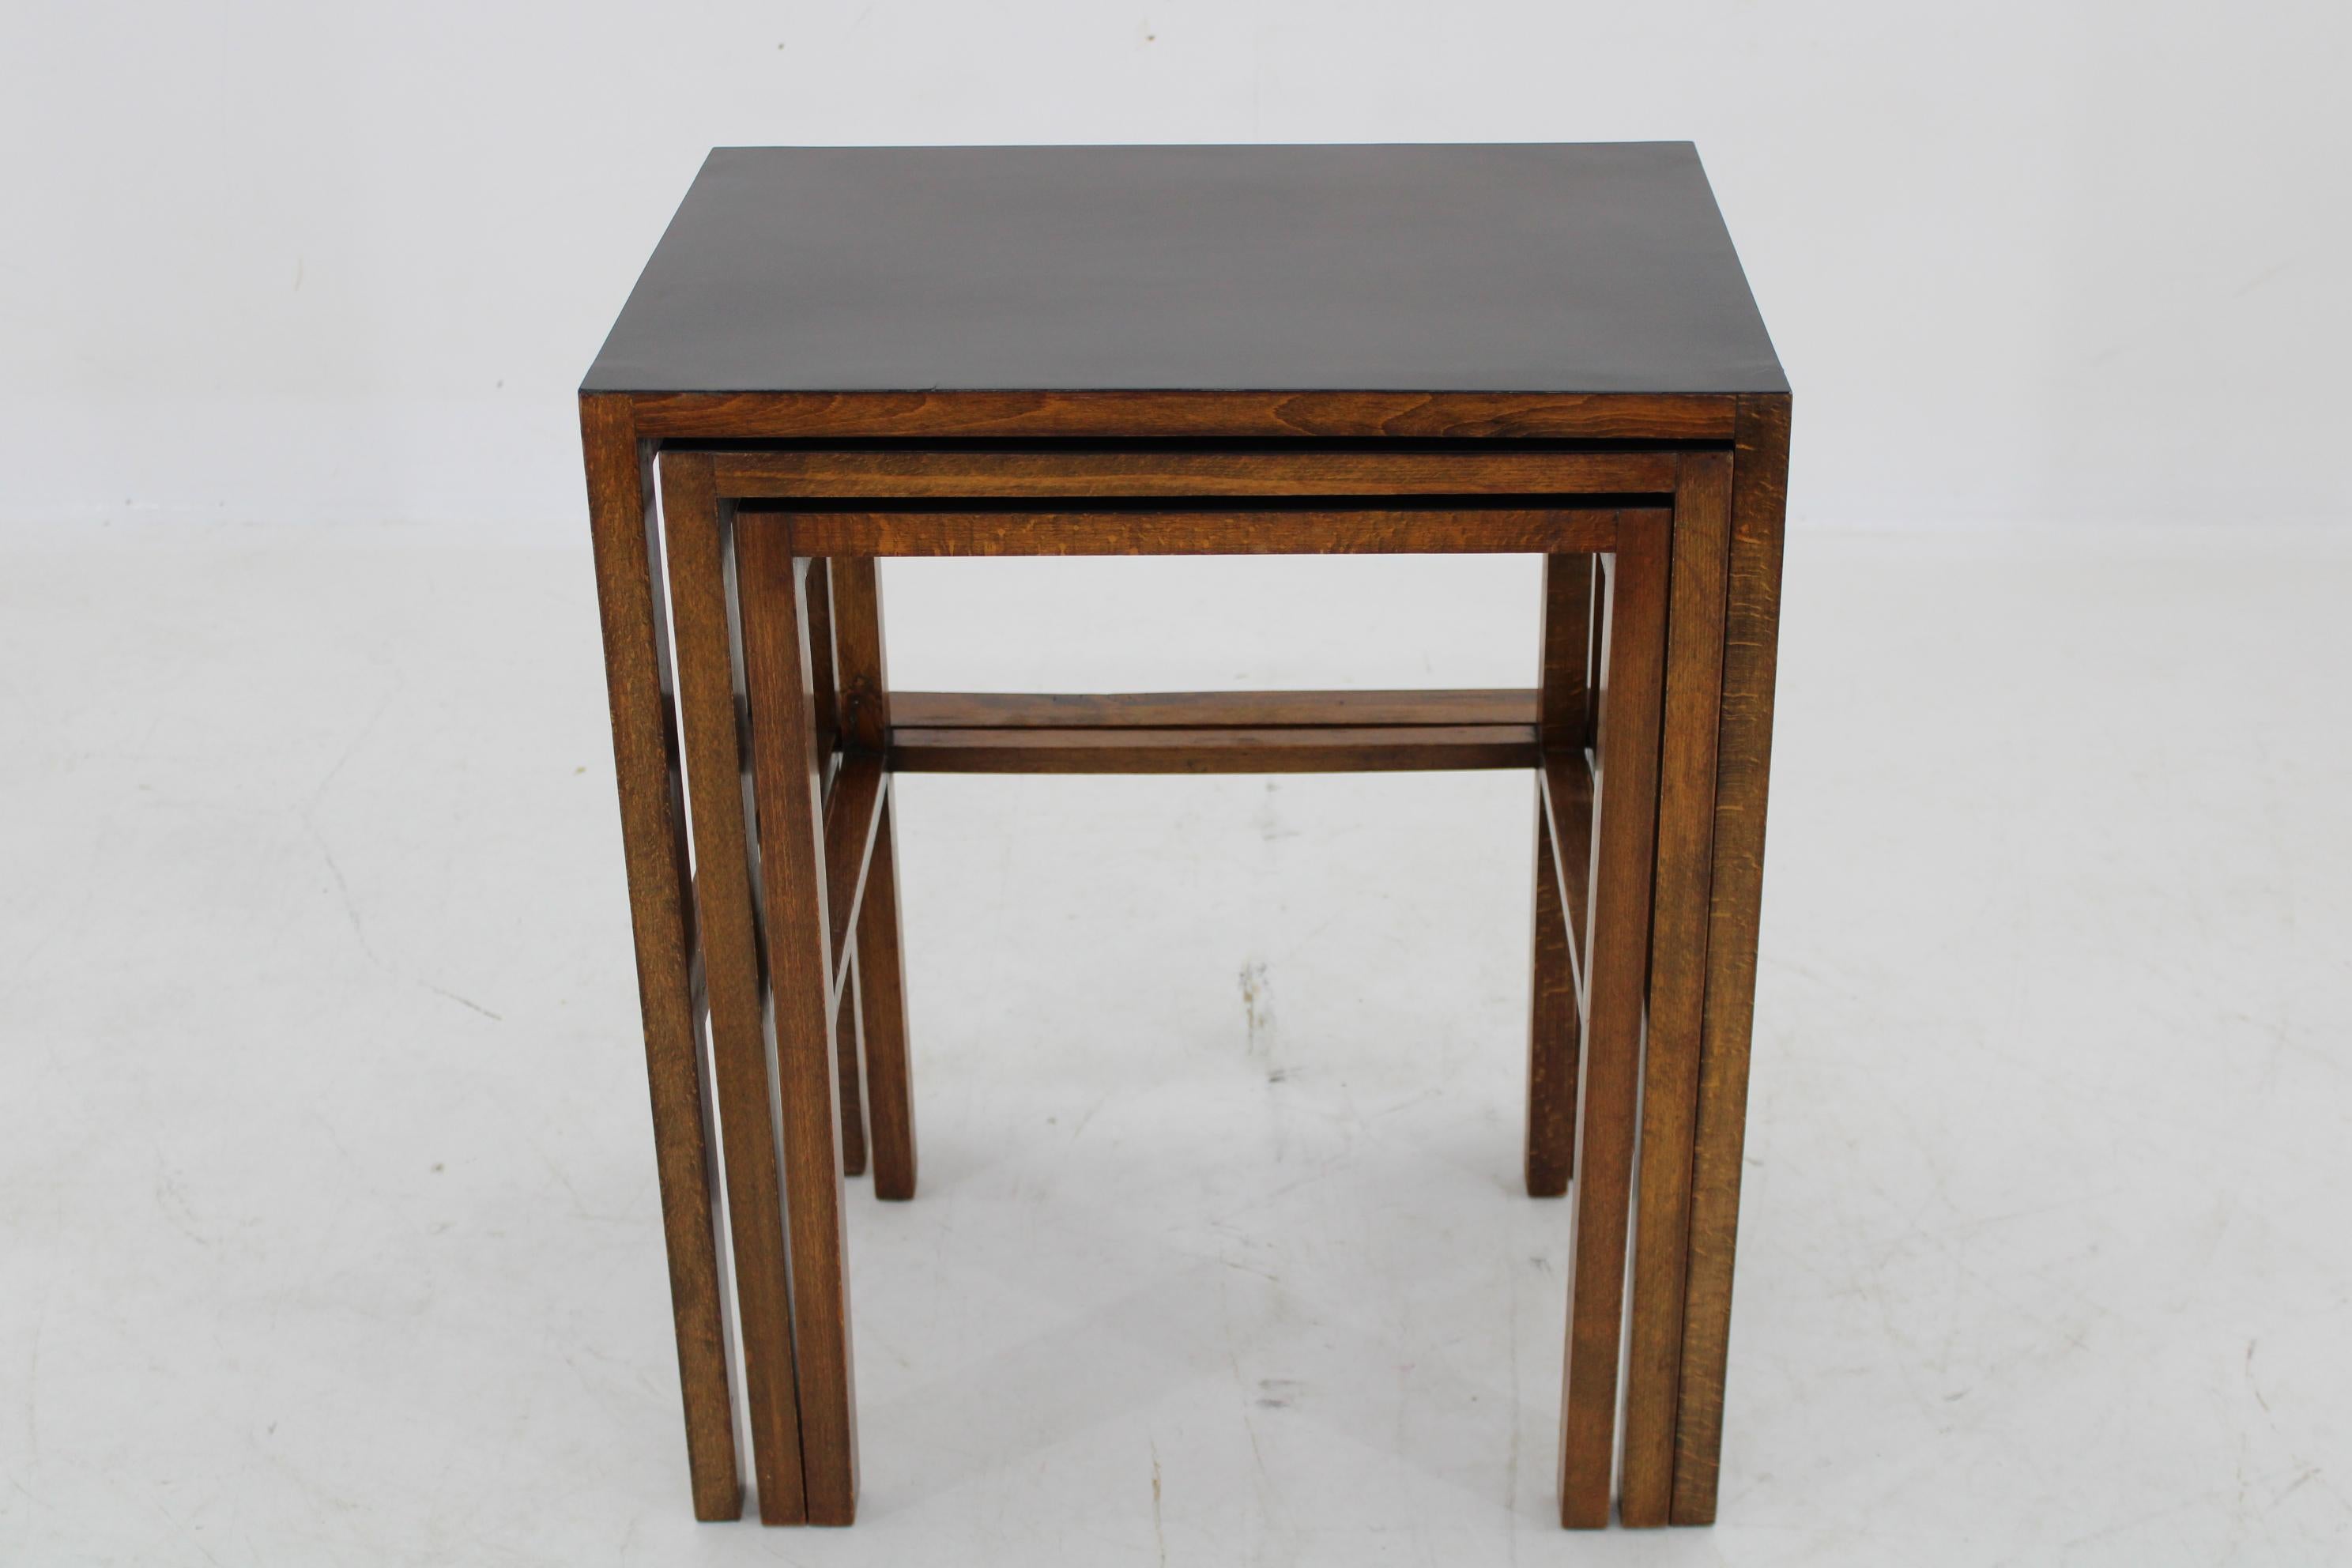 - Carefully refurbished 
- Beech wood and Resopal Top 
- The middle table dimensions : 62cm x 49cm x 37cm 
- The smallest table dimensions : 59cm x 43cm x 35cm 